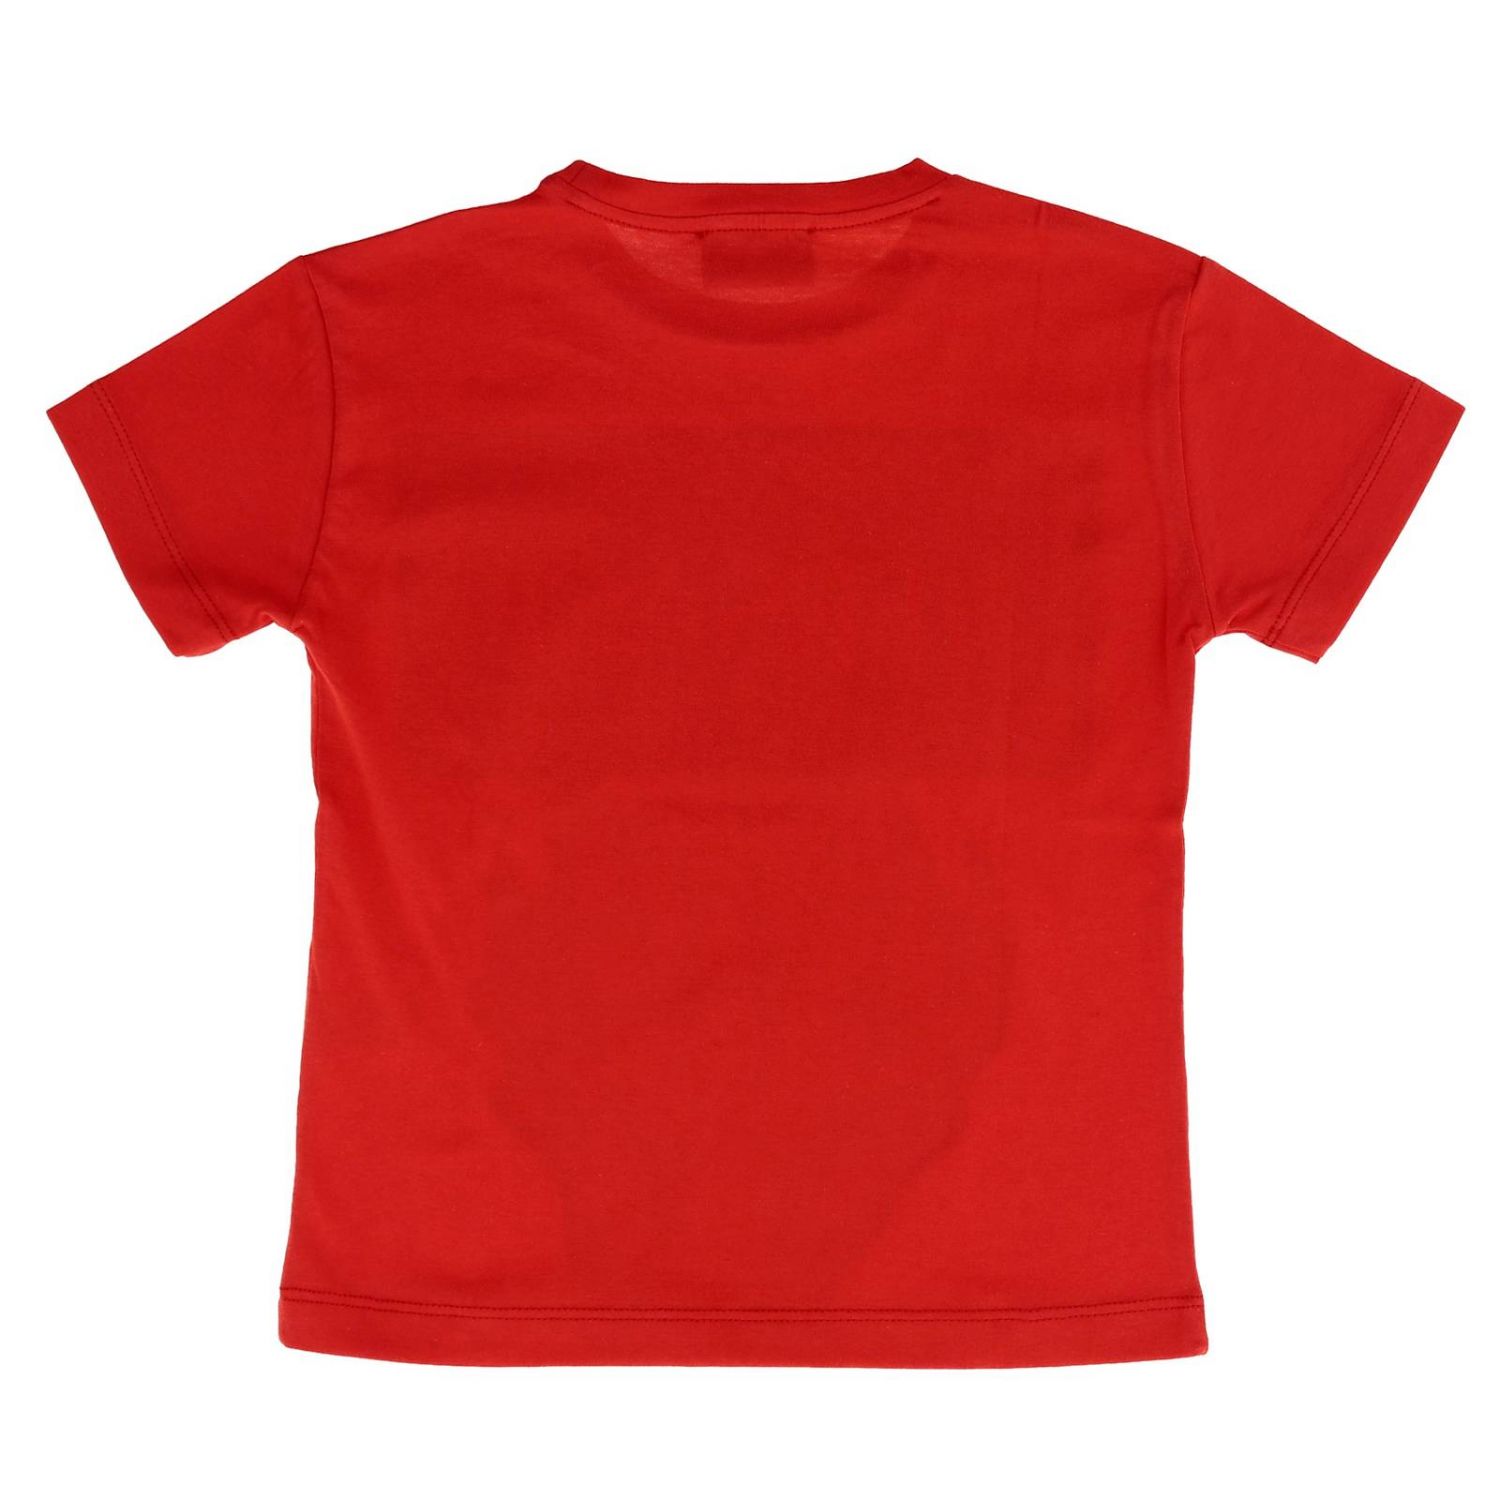 Young Versace Outlet: T-shirt kids Versace Young - Red | T-Shirt Young ...